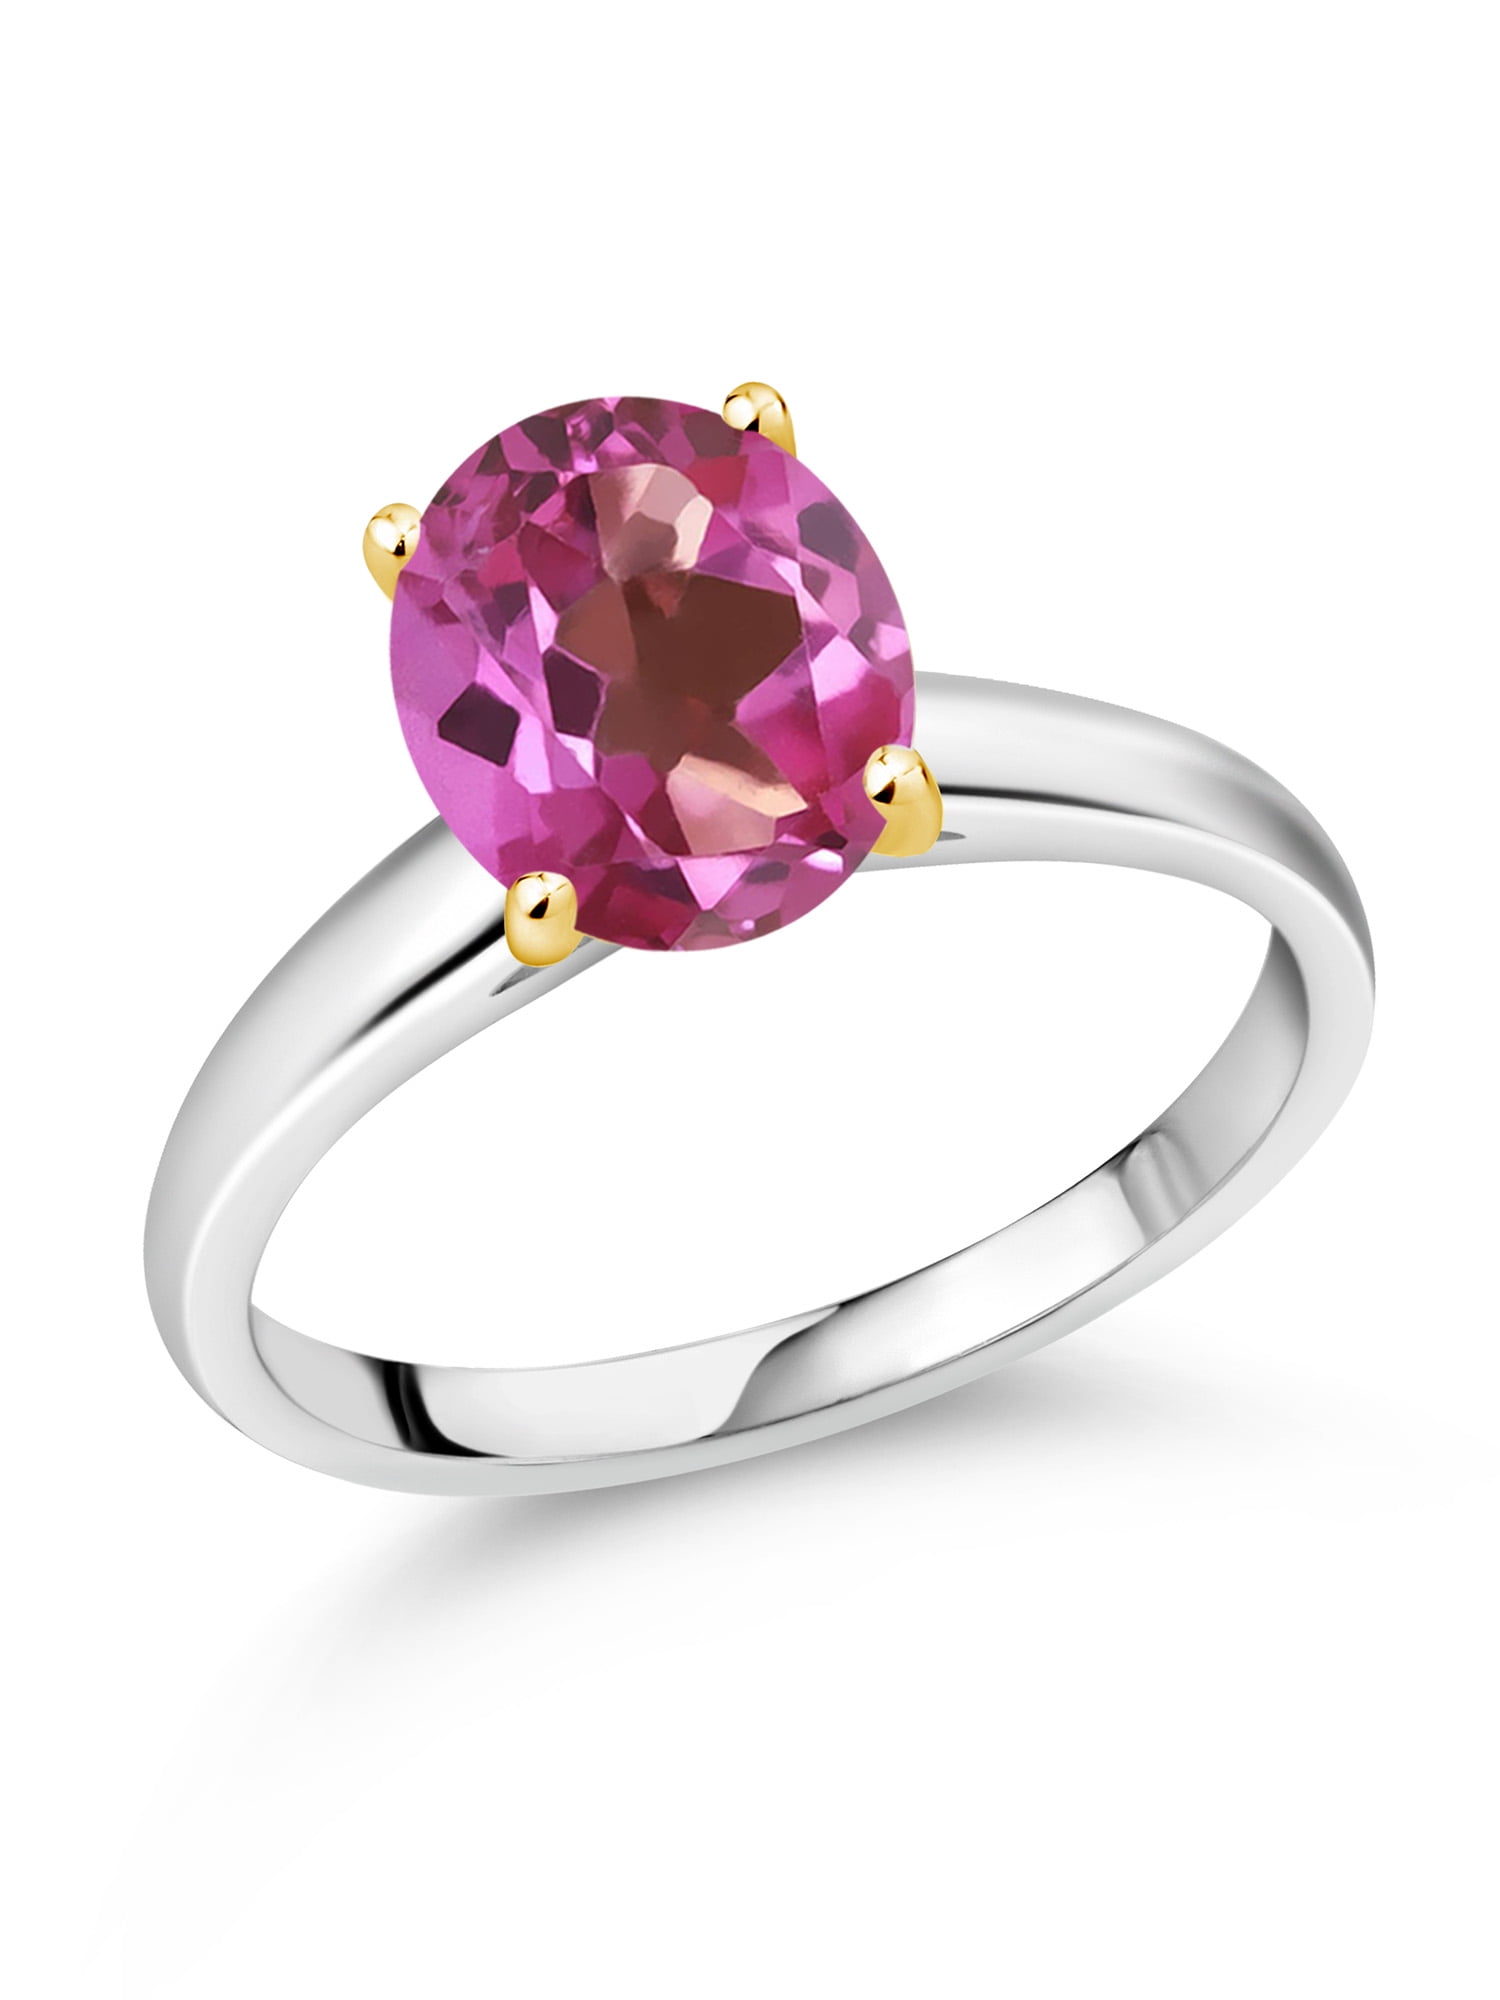 4.50Ct Oval Pink Ruby Diamond Engagement Halo Women/'s Ring 14K White Gold Finish